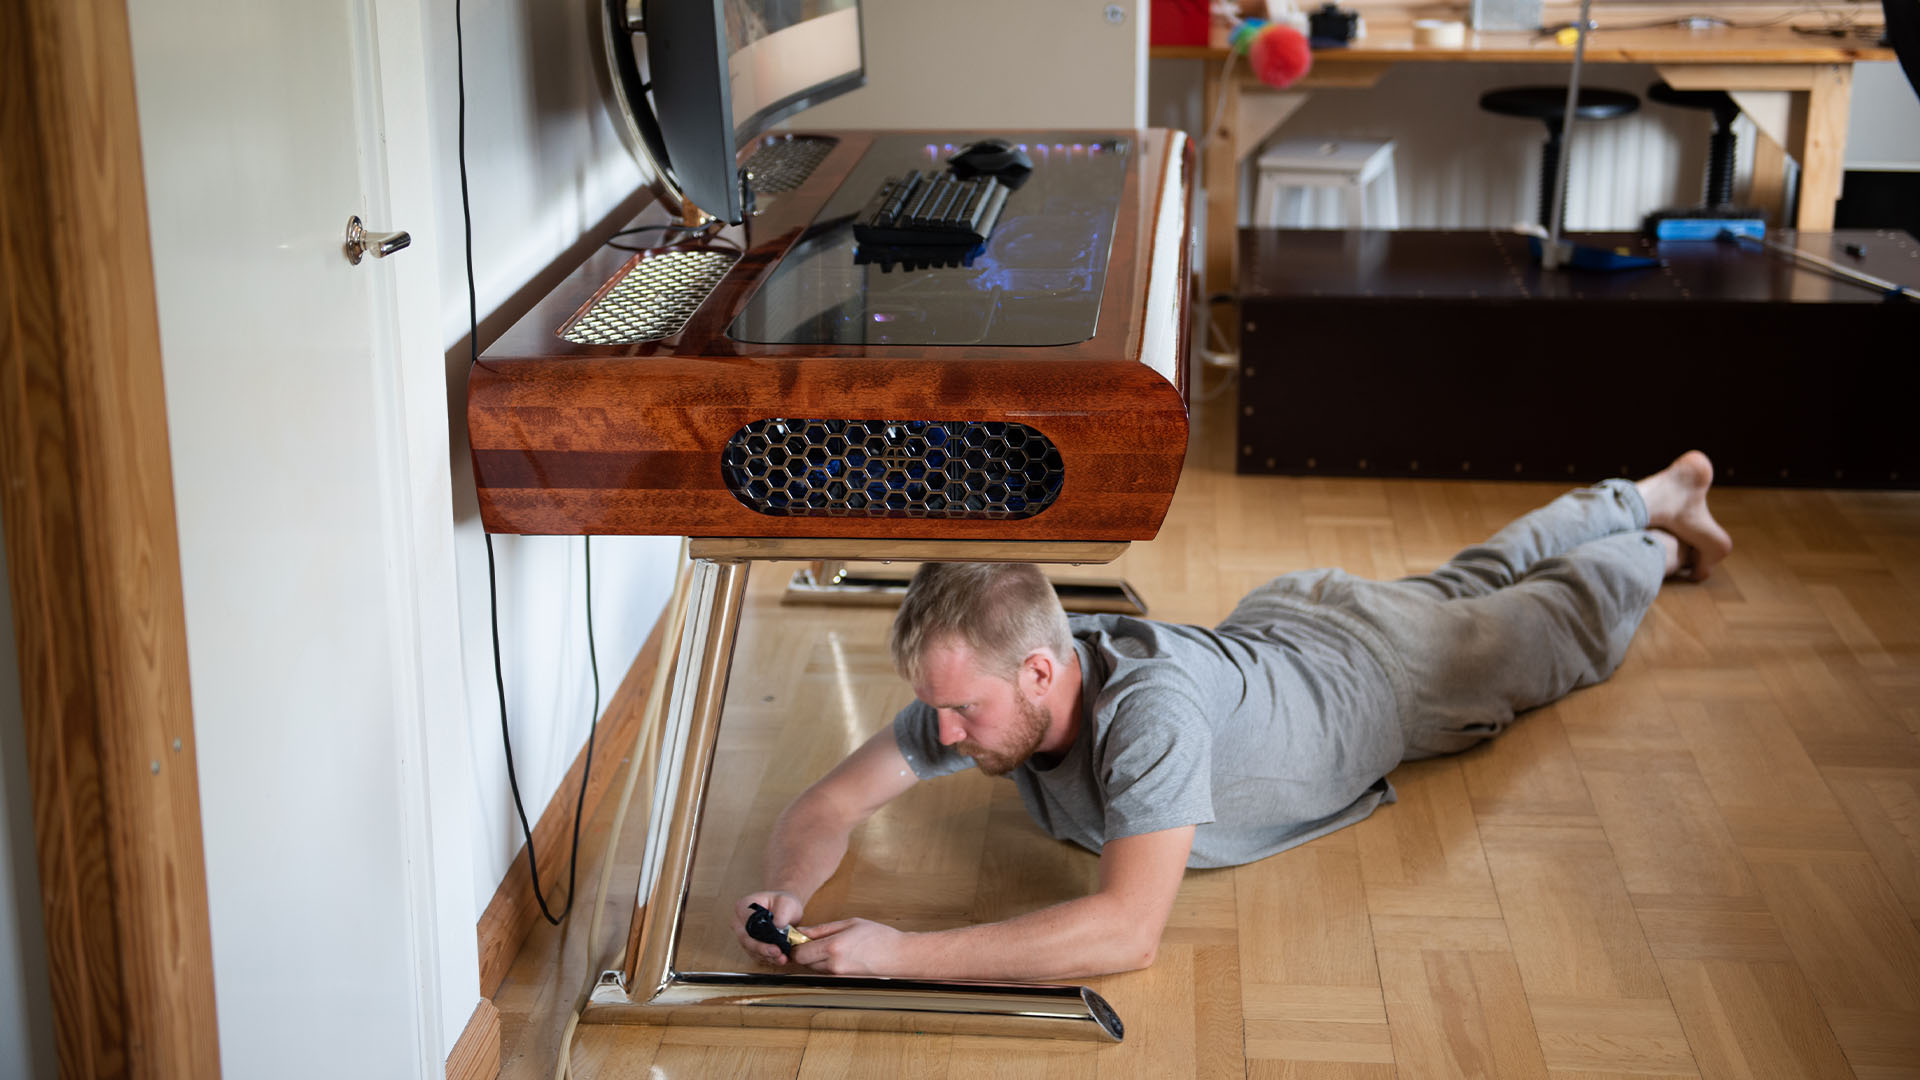 A friend works on the legs of the wooden desk PC